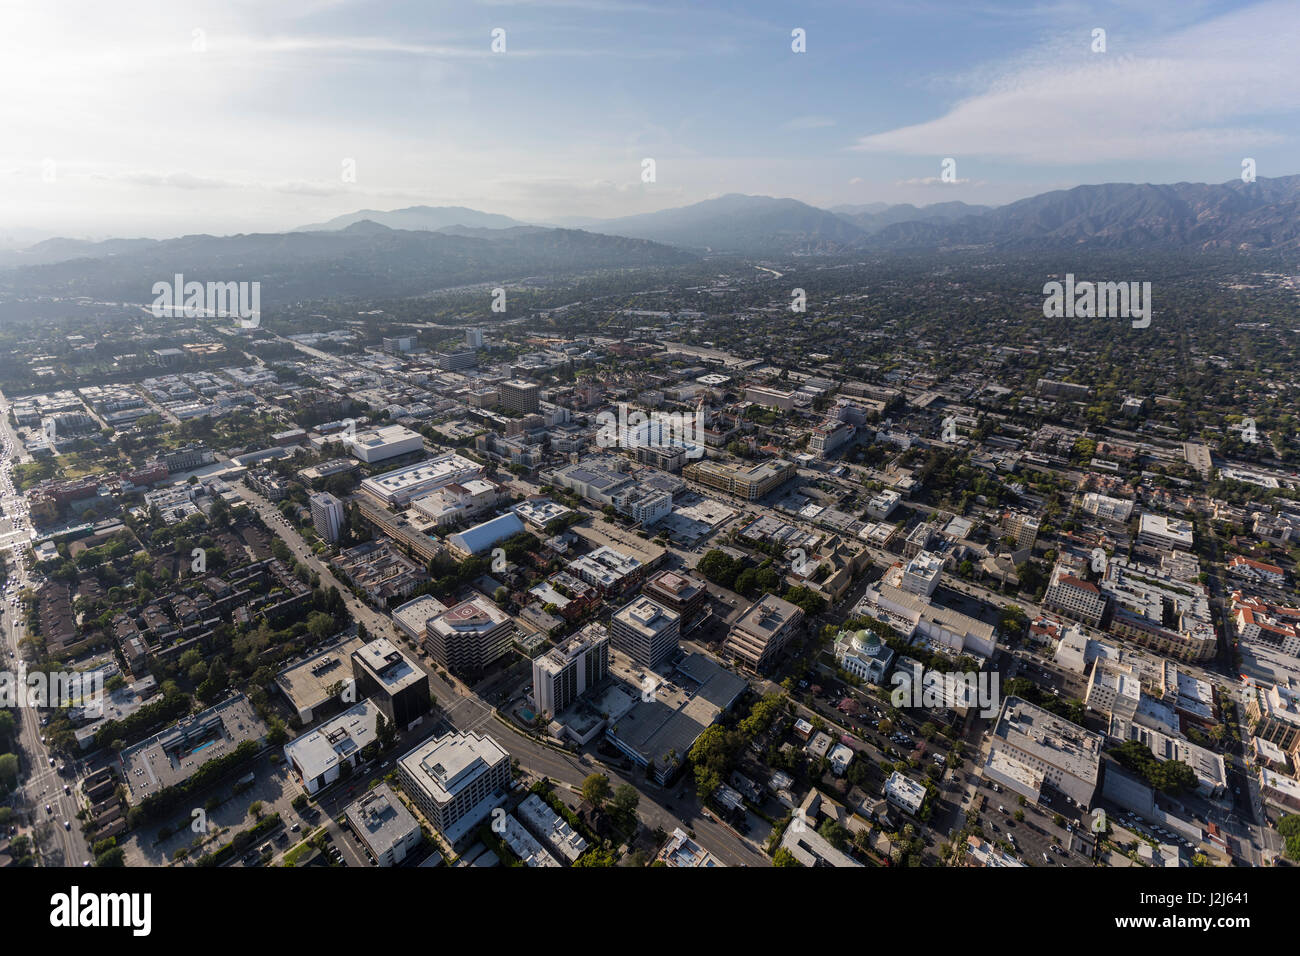 Aerial view of downtown Pasadena and the San Gabriel Mountains in Southern California. Stock Photo